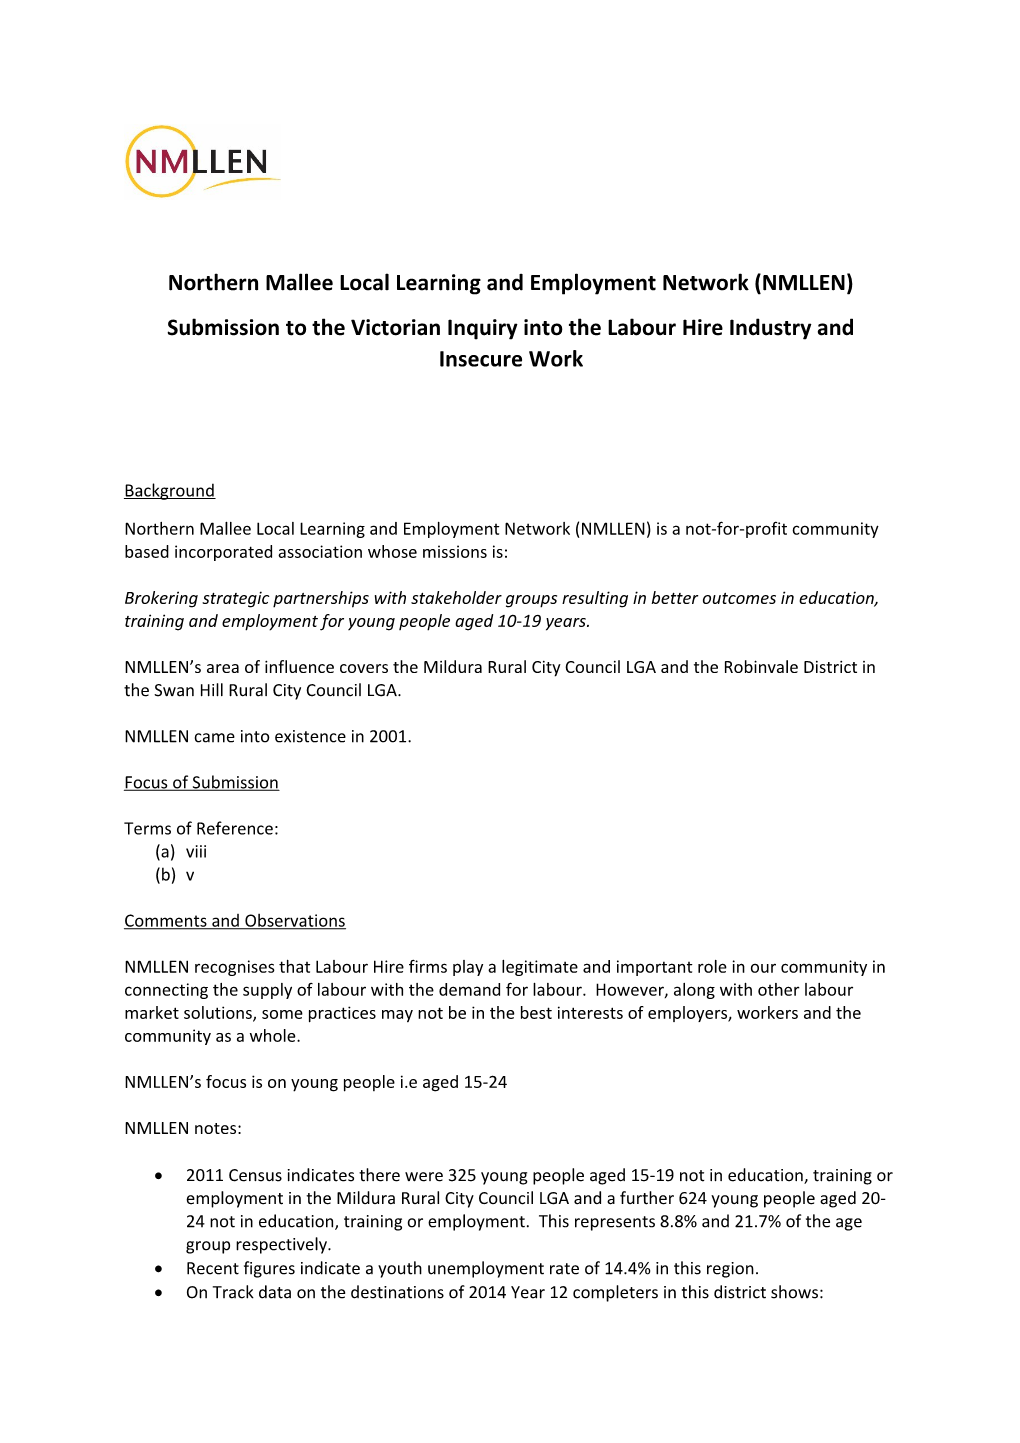 Northern Mallee Local Learning and Employment Network (NMLLEN)